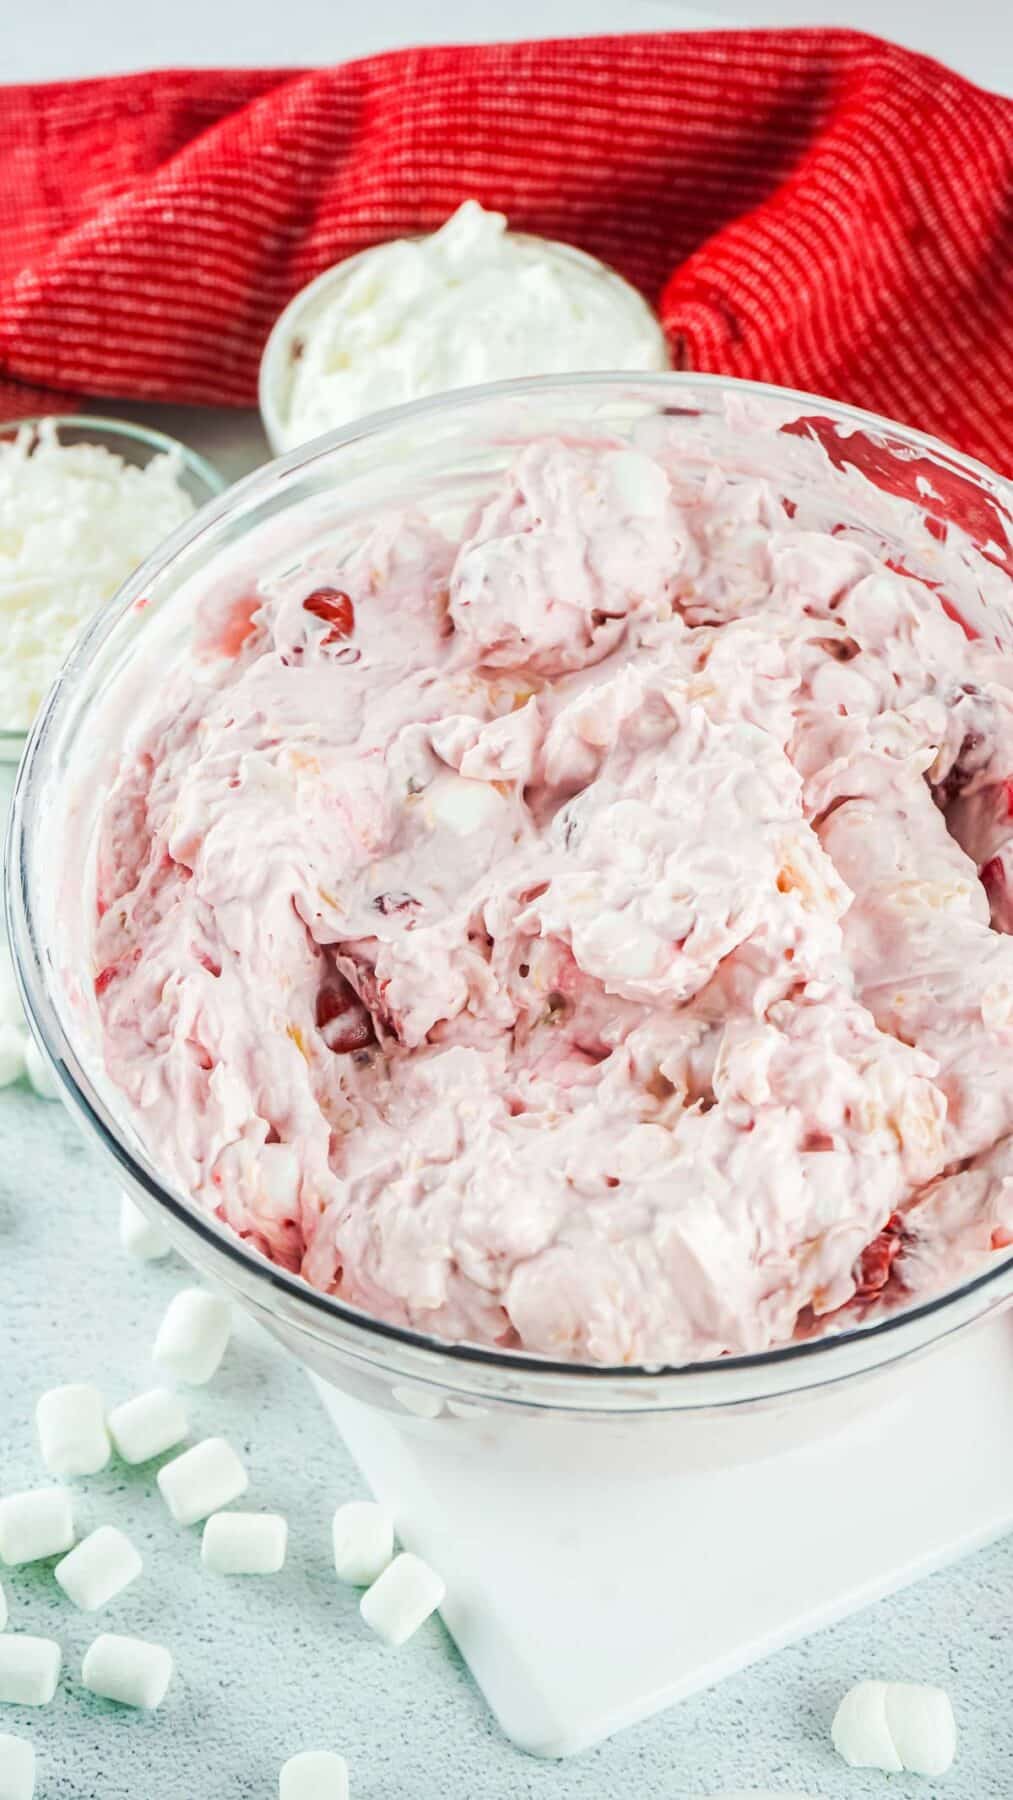 All ingredients for this cherry fluff salad in a large mixing bowl, mixed 